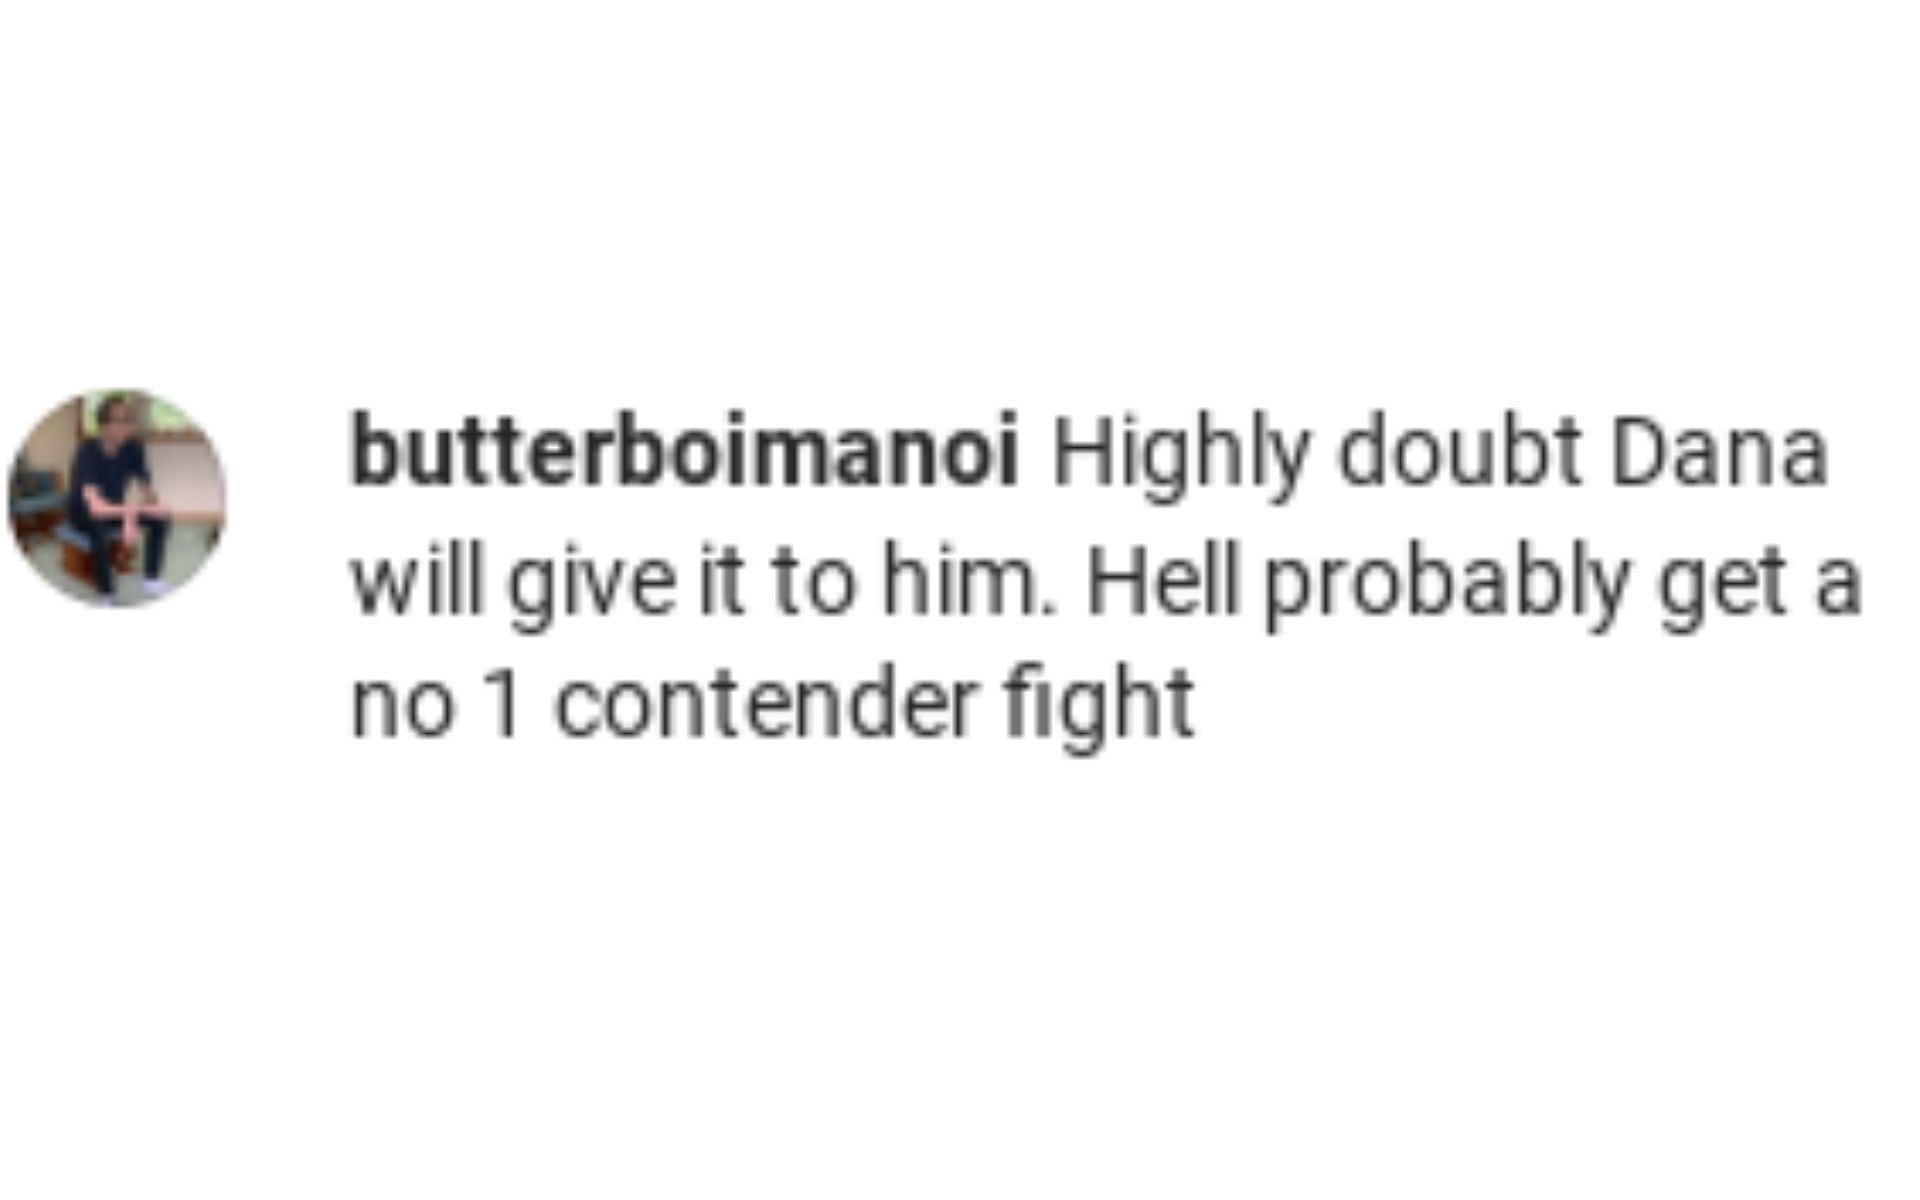 A fan thinking a No.1 contender bout is more likely